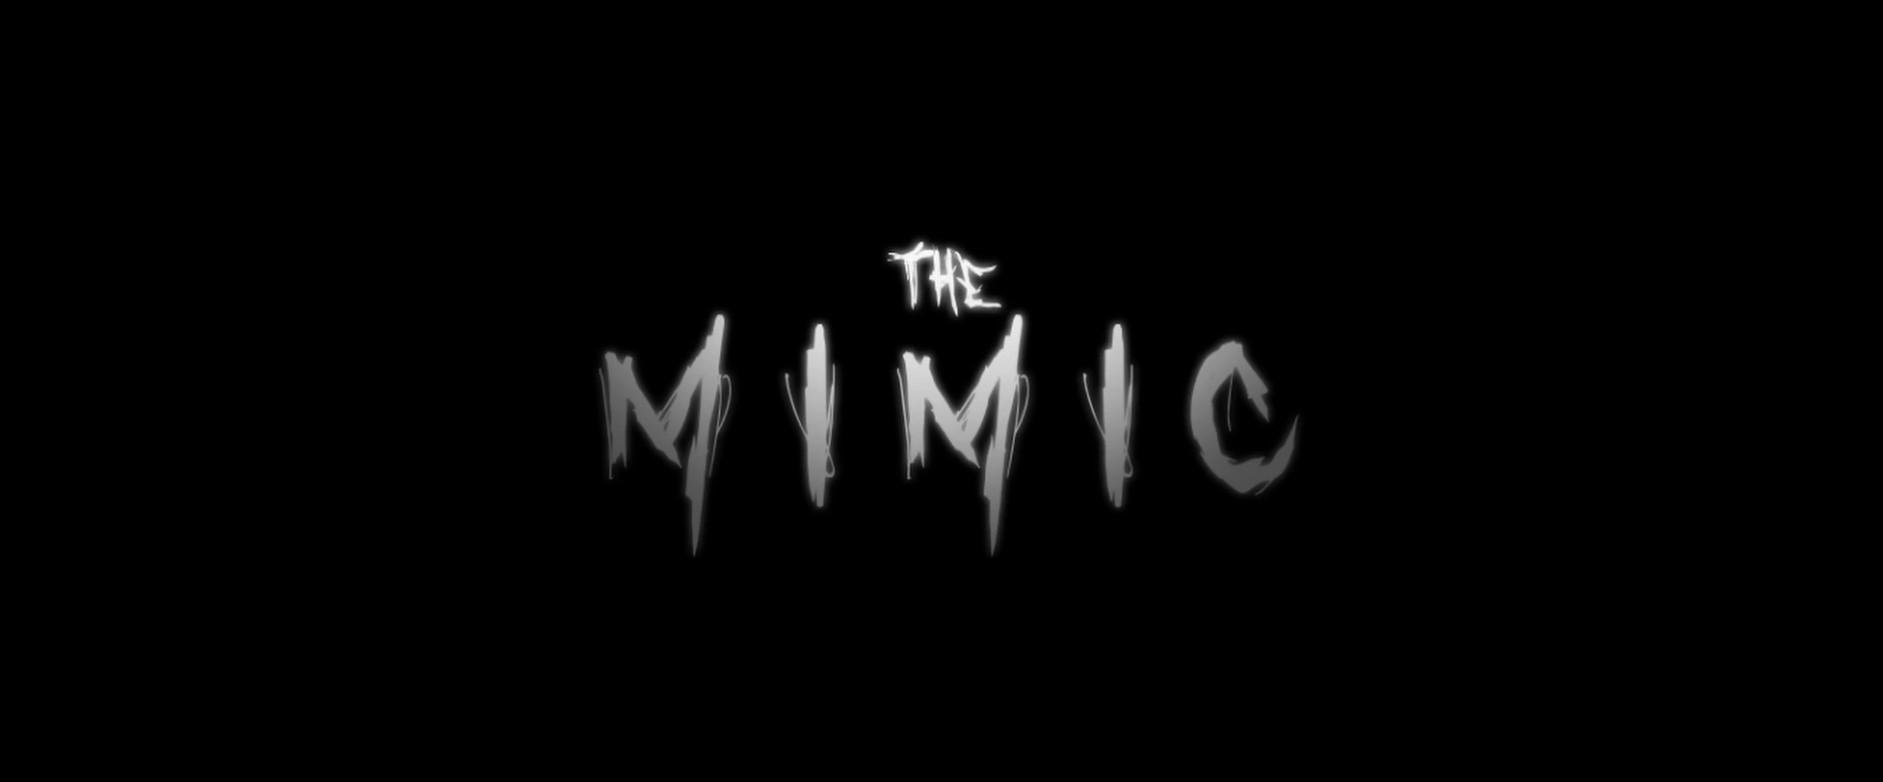 HOW DO WE GET OUTTA HERE ? THE MIMIC (CHAPTER 1 MAZE) ROBLOX